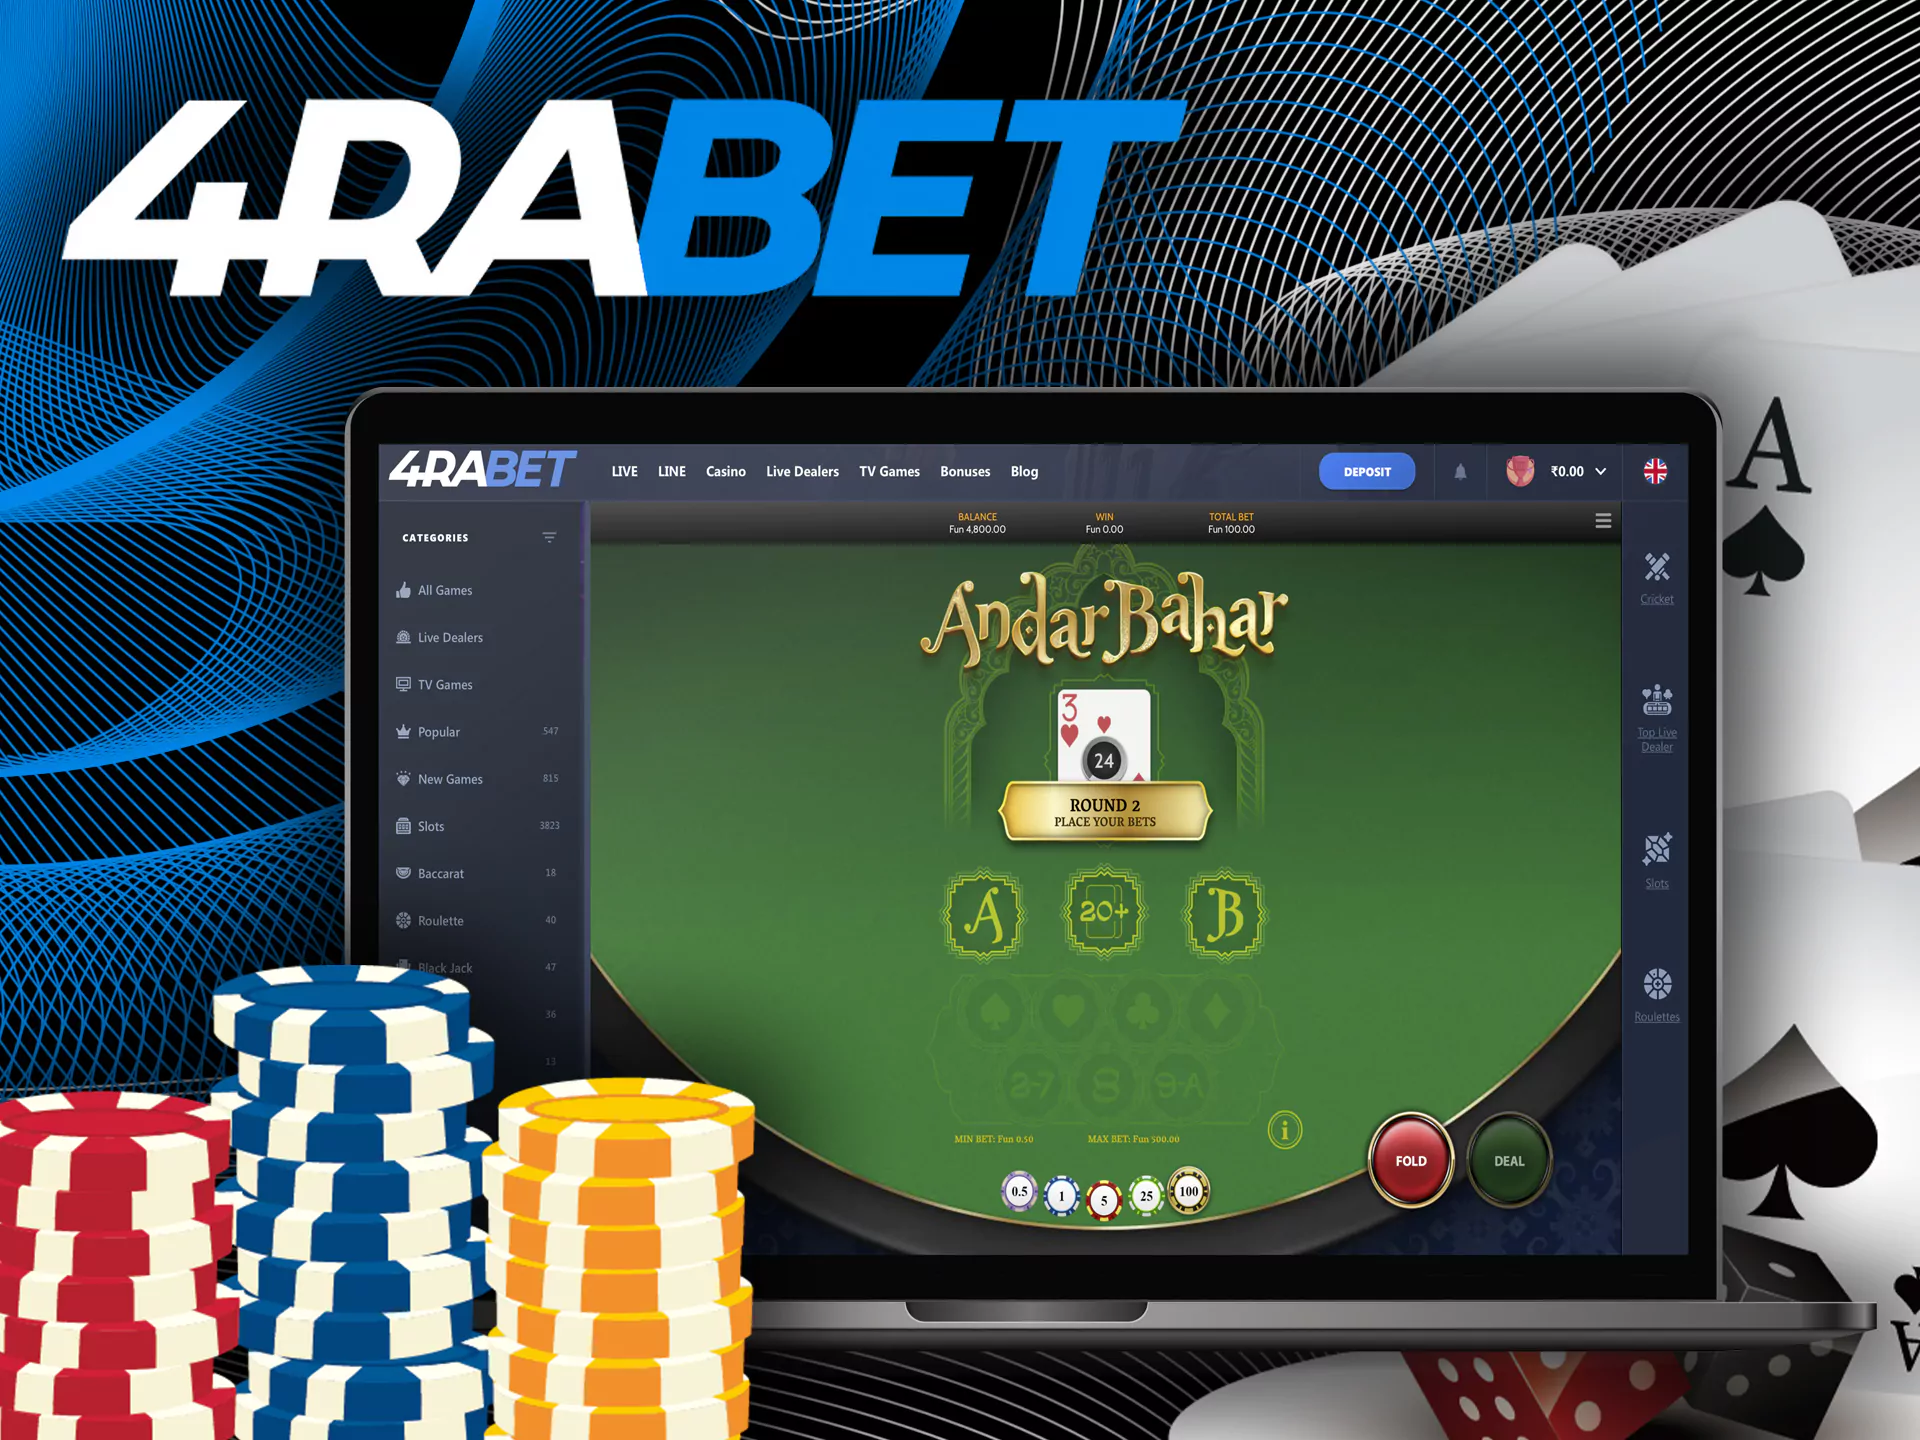 Andar Bahar — one of the most best Casino game at 4rabet Bookie.